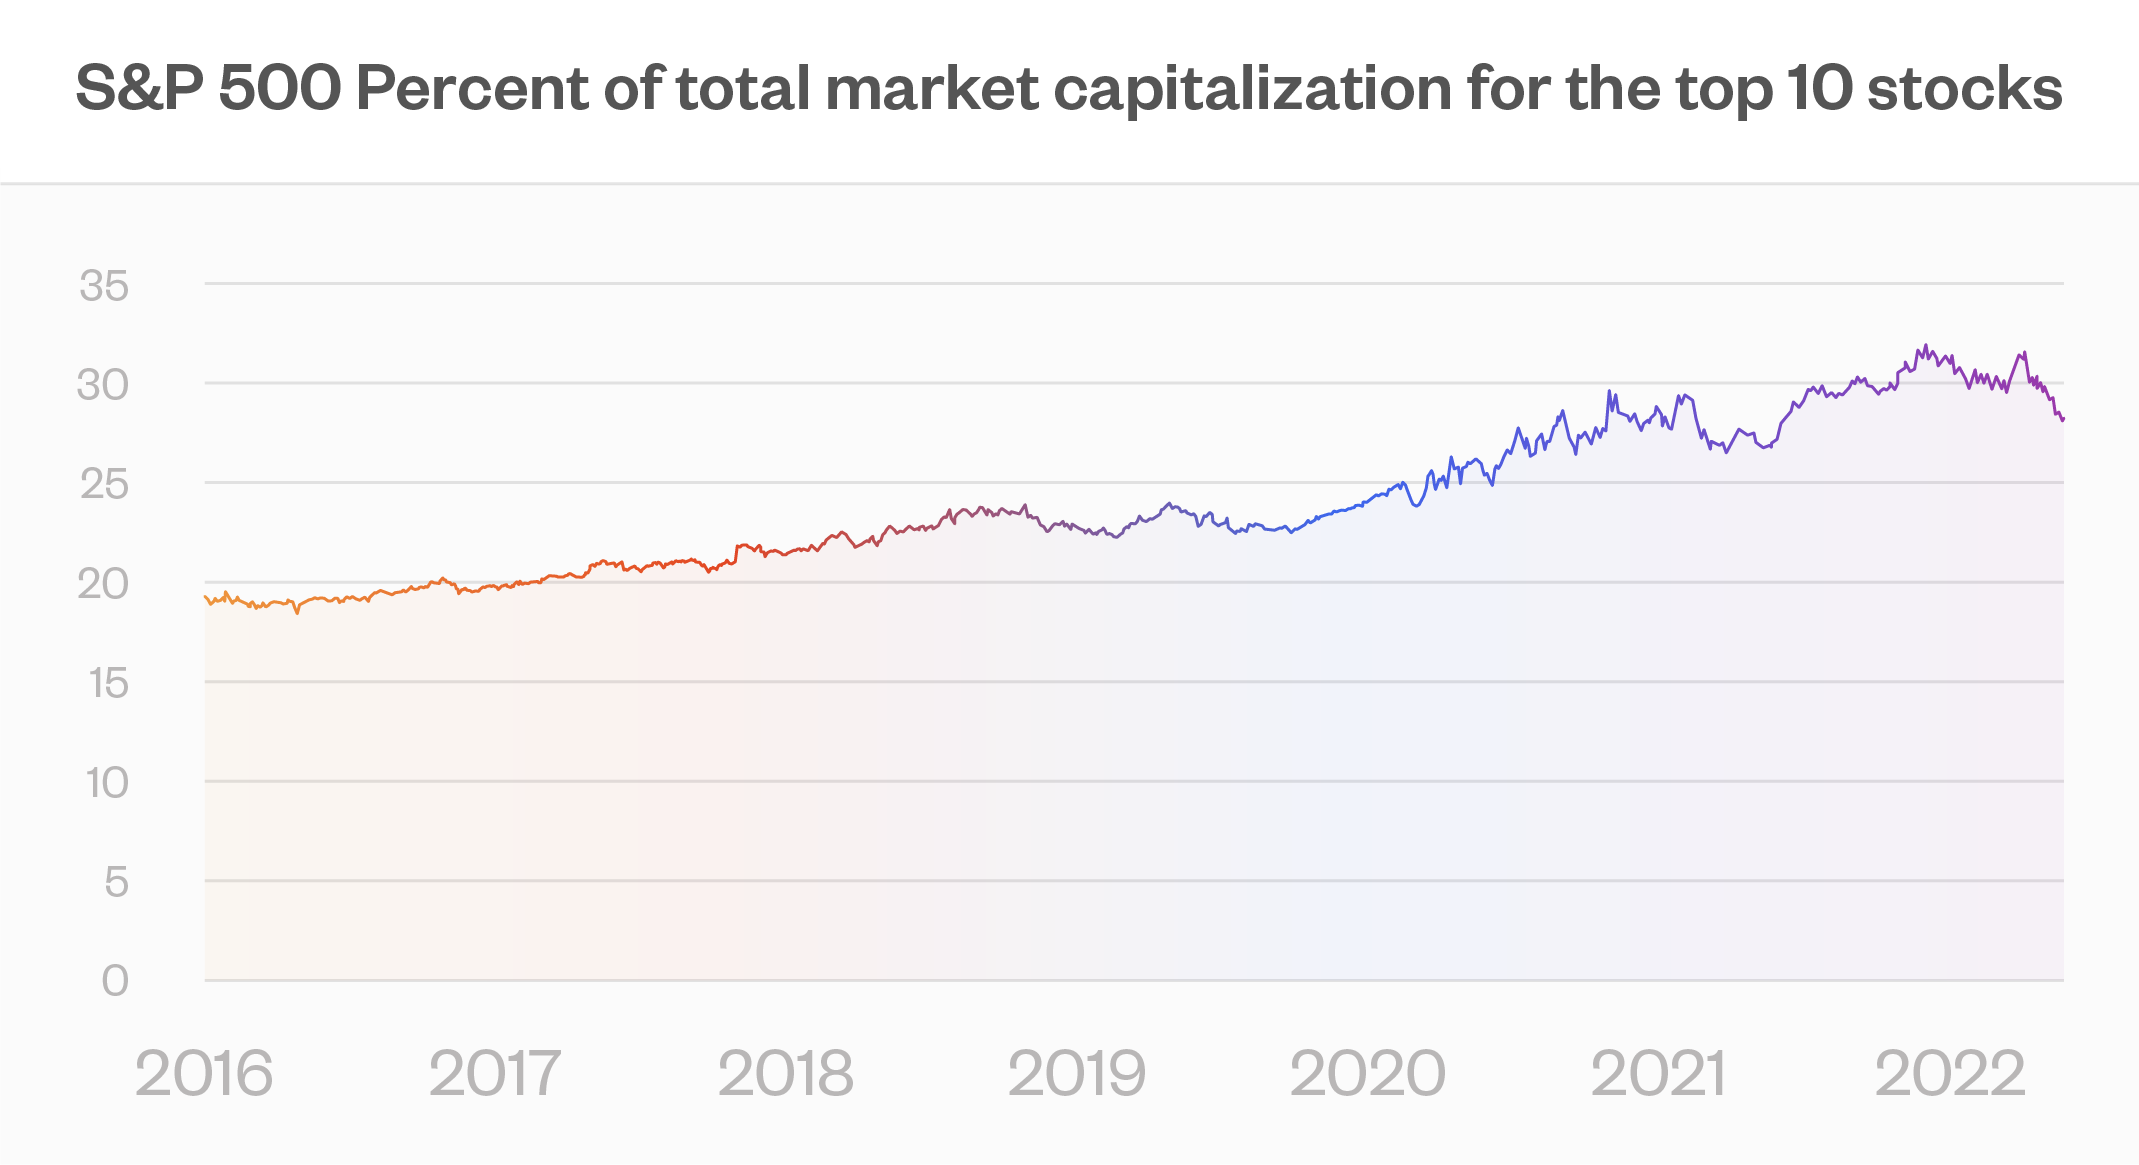 S&P 500 Percent of total market capitalization for the top 10 stocks